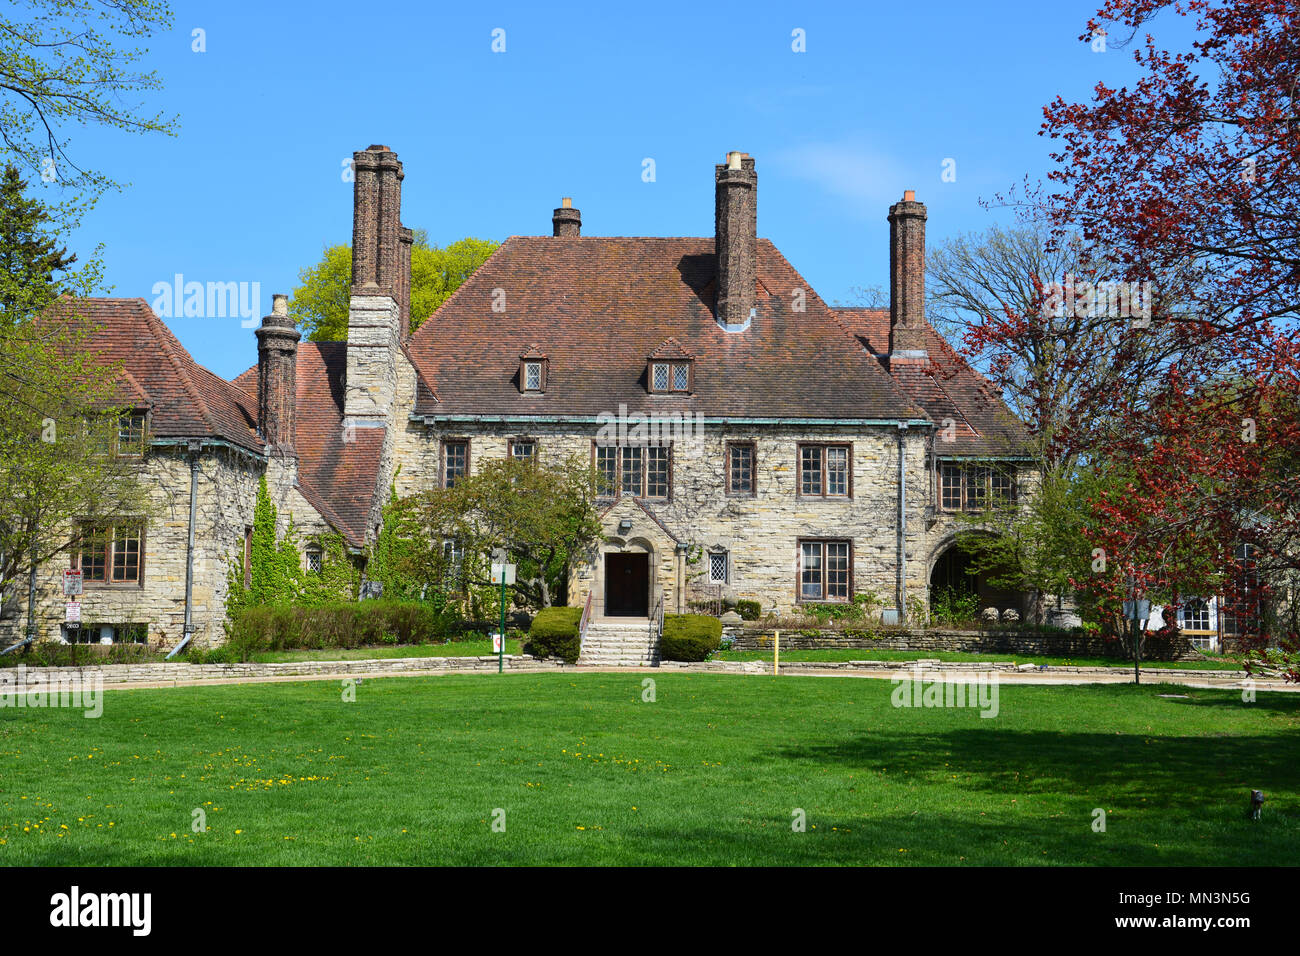 The 1920's era Harley Clark mansion located on the shores of Lake Michigan in Evanston Illinois. Stock Photo